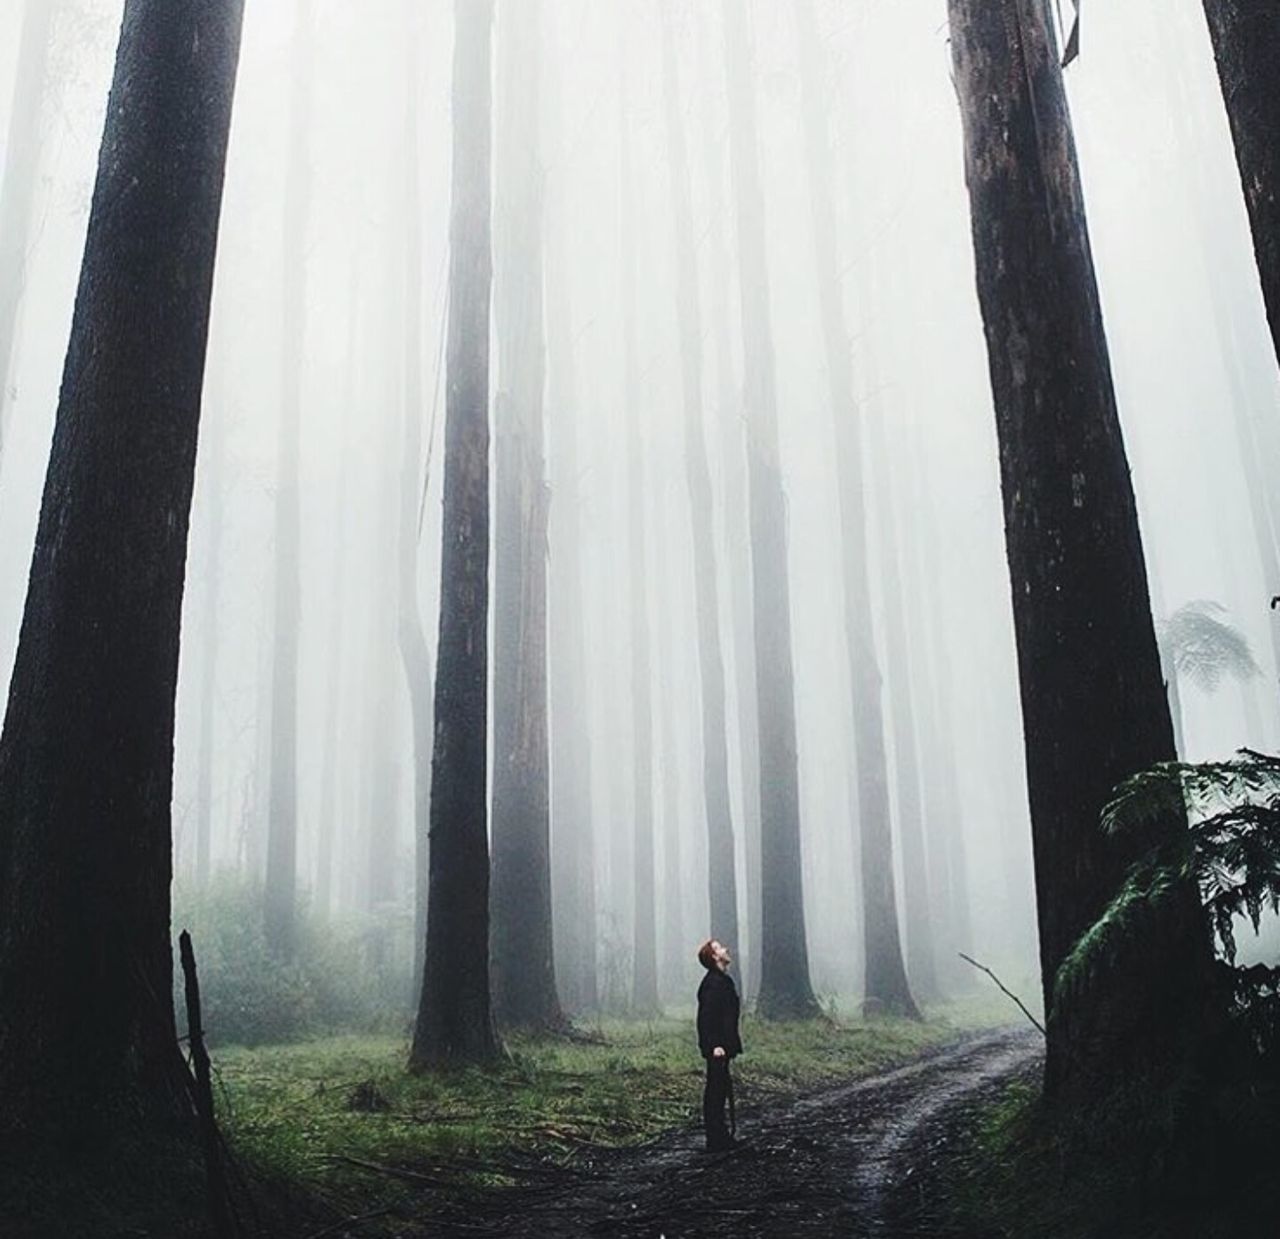 tree, rear view, full length, fog, lifestyles, leisure activity, standing, tree trunk, forest, men, walking, person, foggy, nature, weather, day, woodland, tranquility